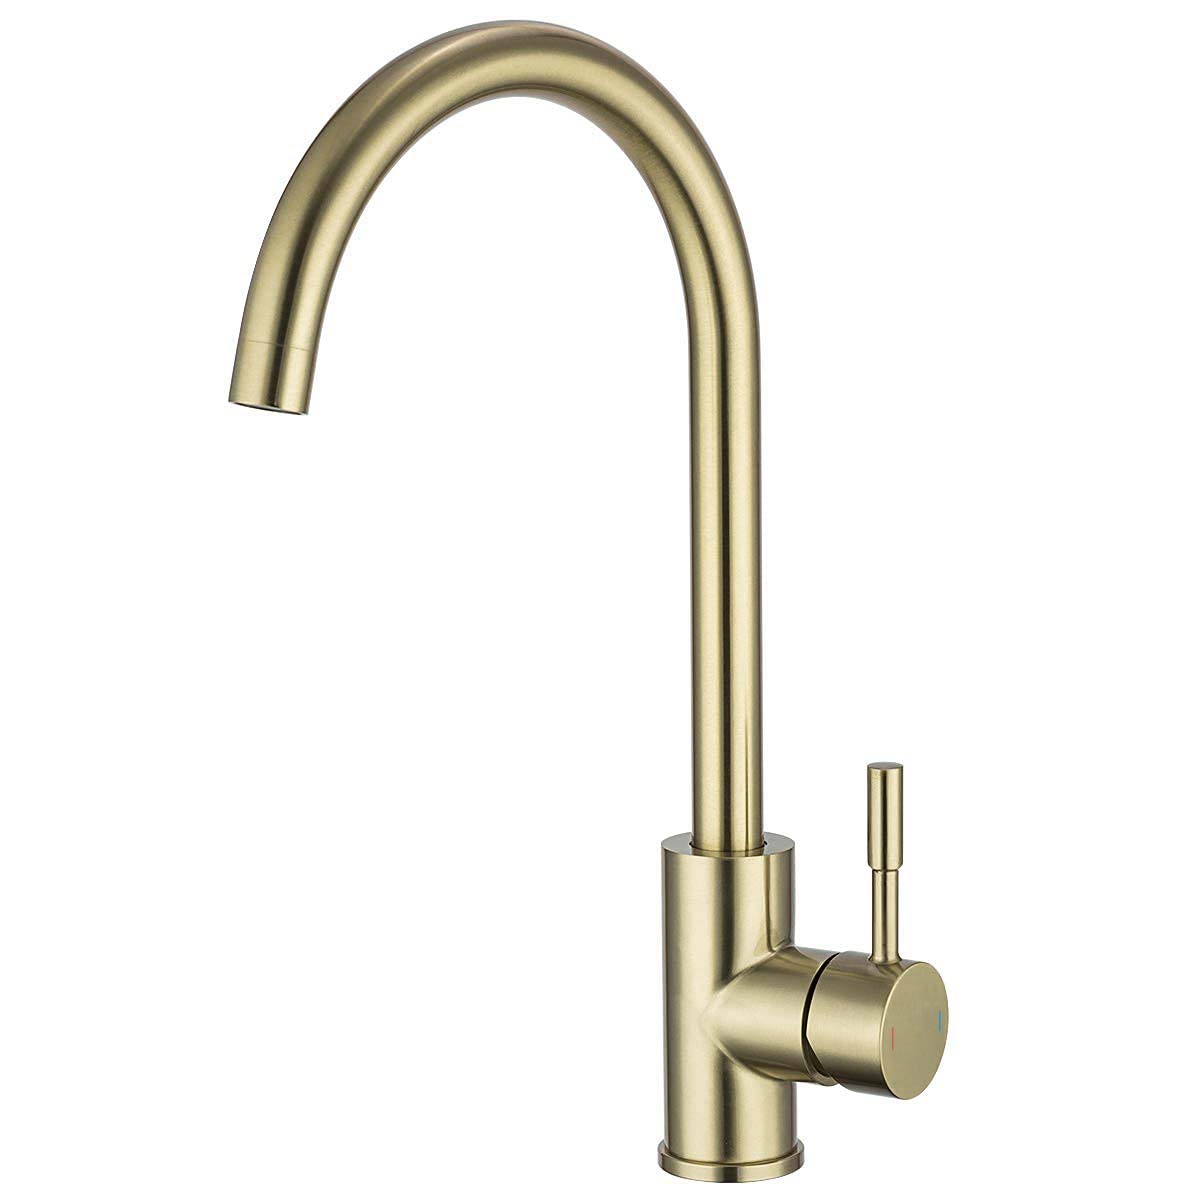 Victoria Brushed Brass Kitchen Sink Single Lever Mixer Tap With Diffuser And 360 Swivel Spout